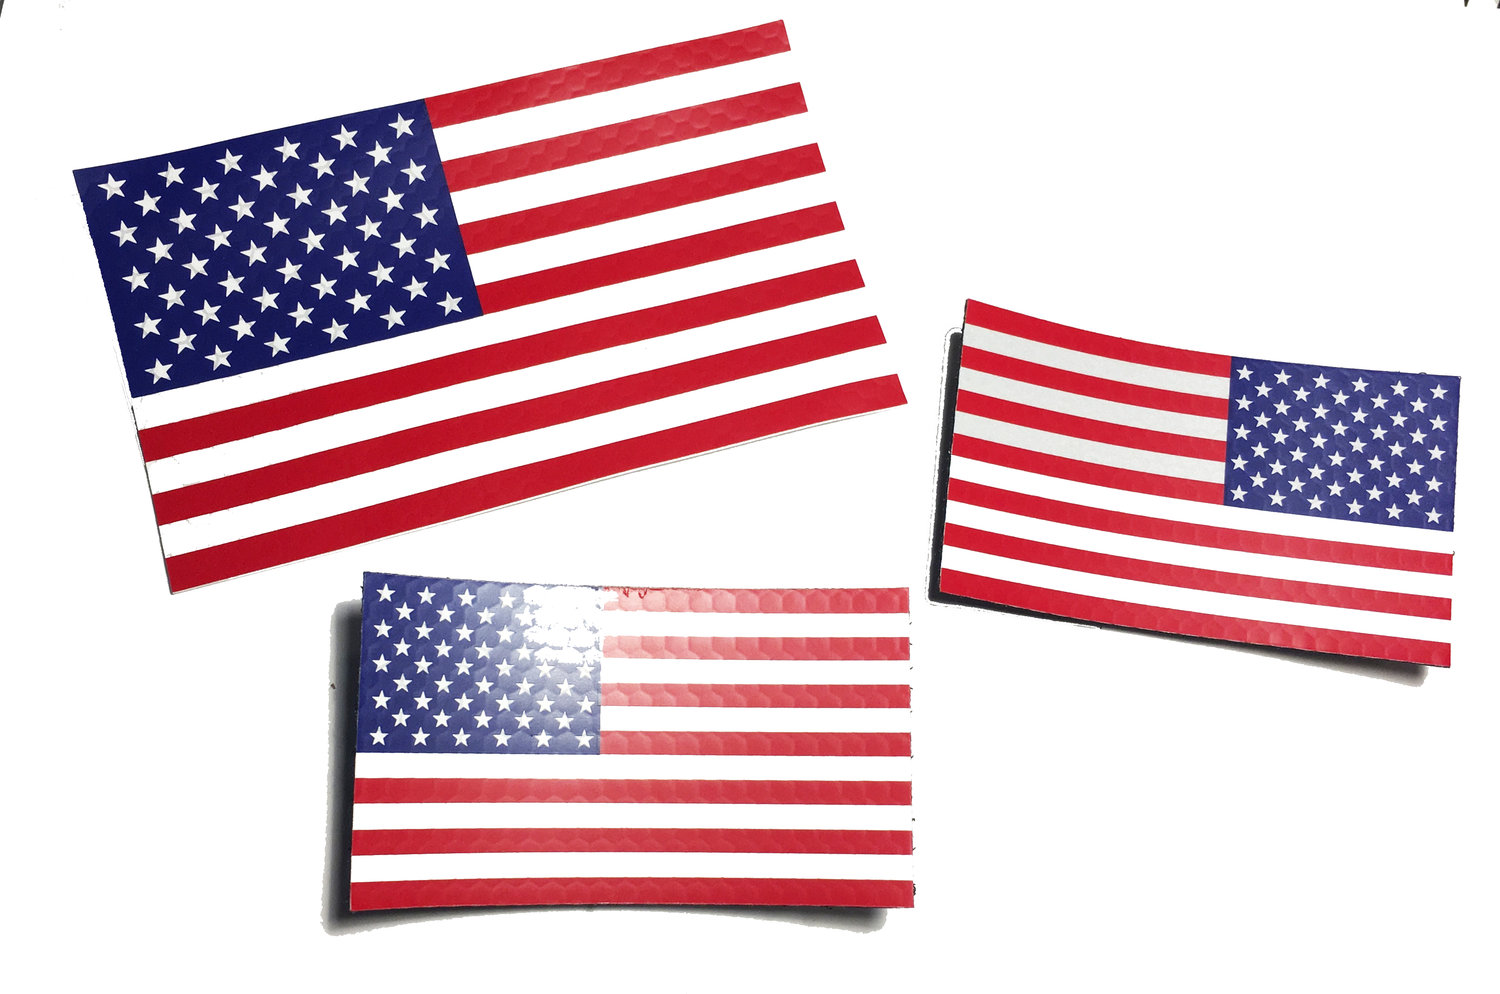 IR American Flag Patch - Full Color (Red White Blue - Right Side)